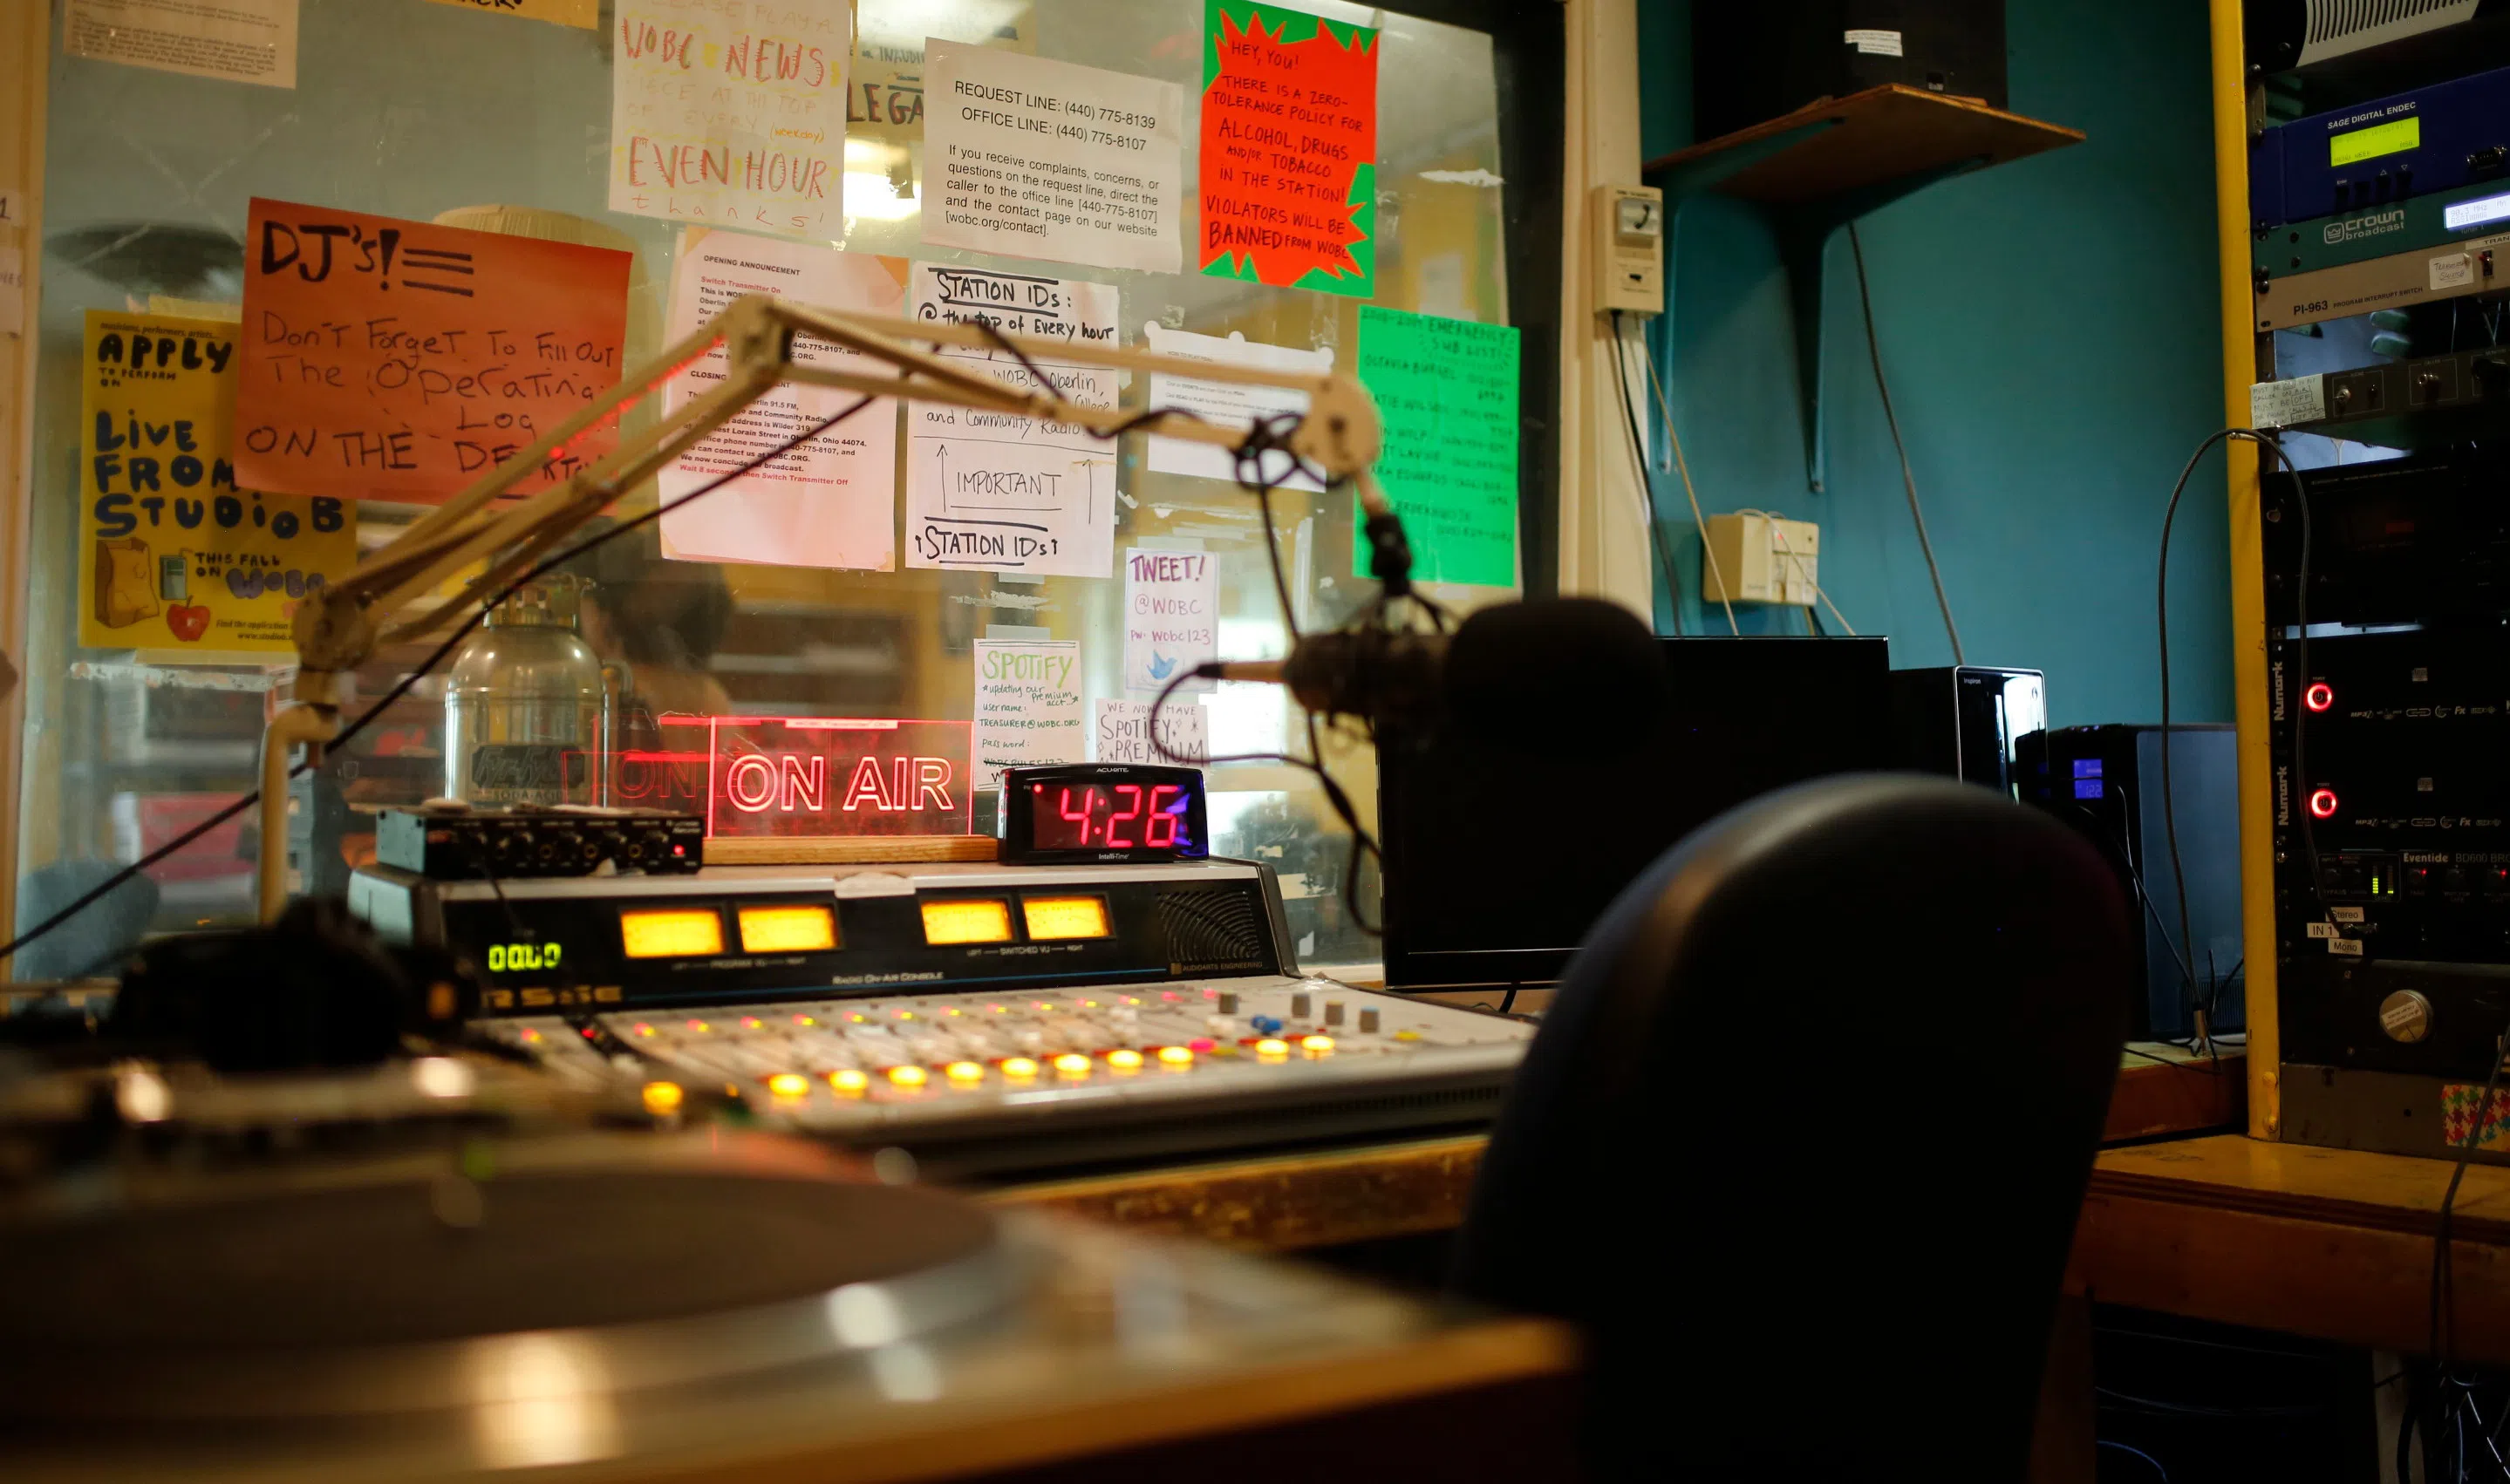 A picture of the radio station interface